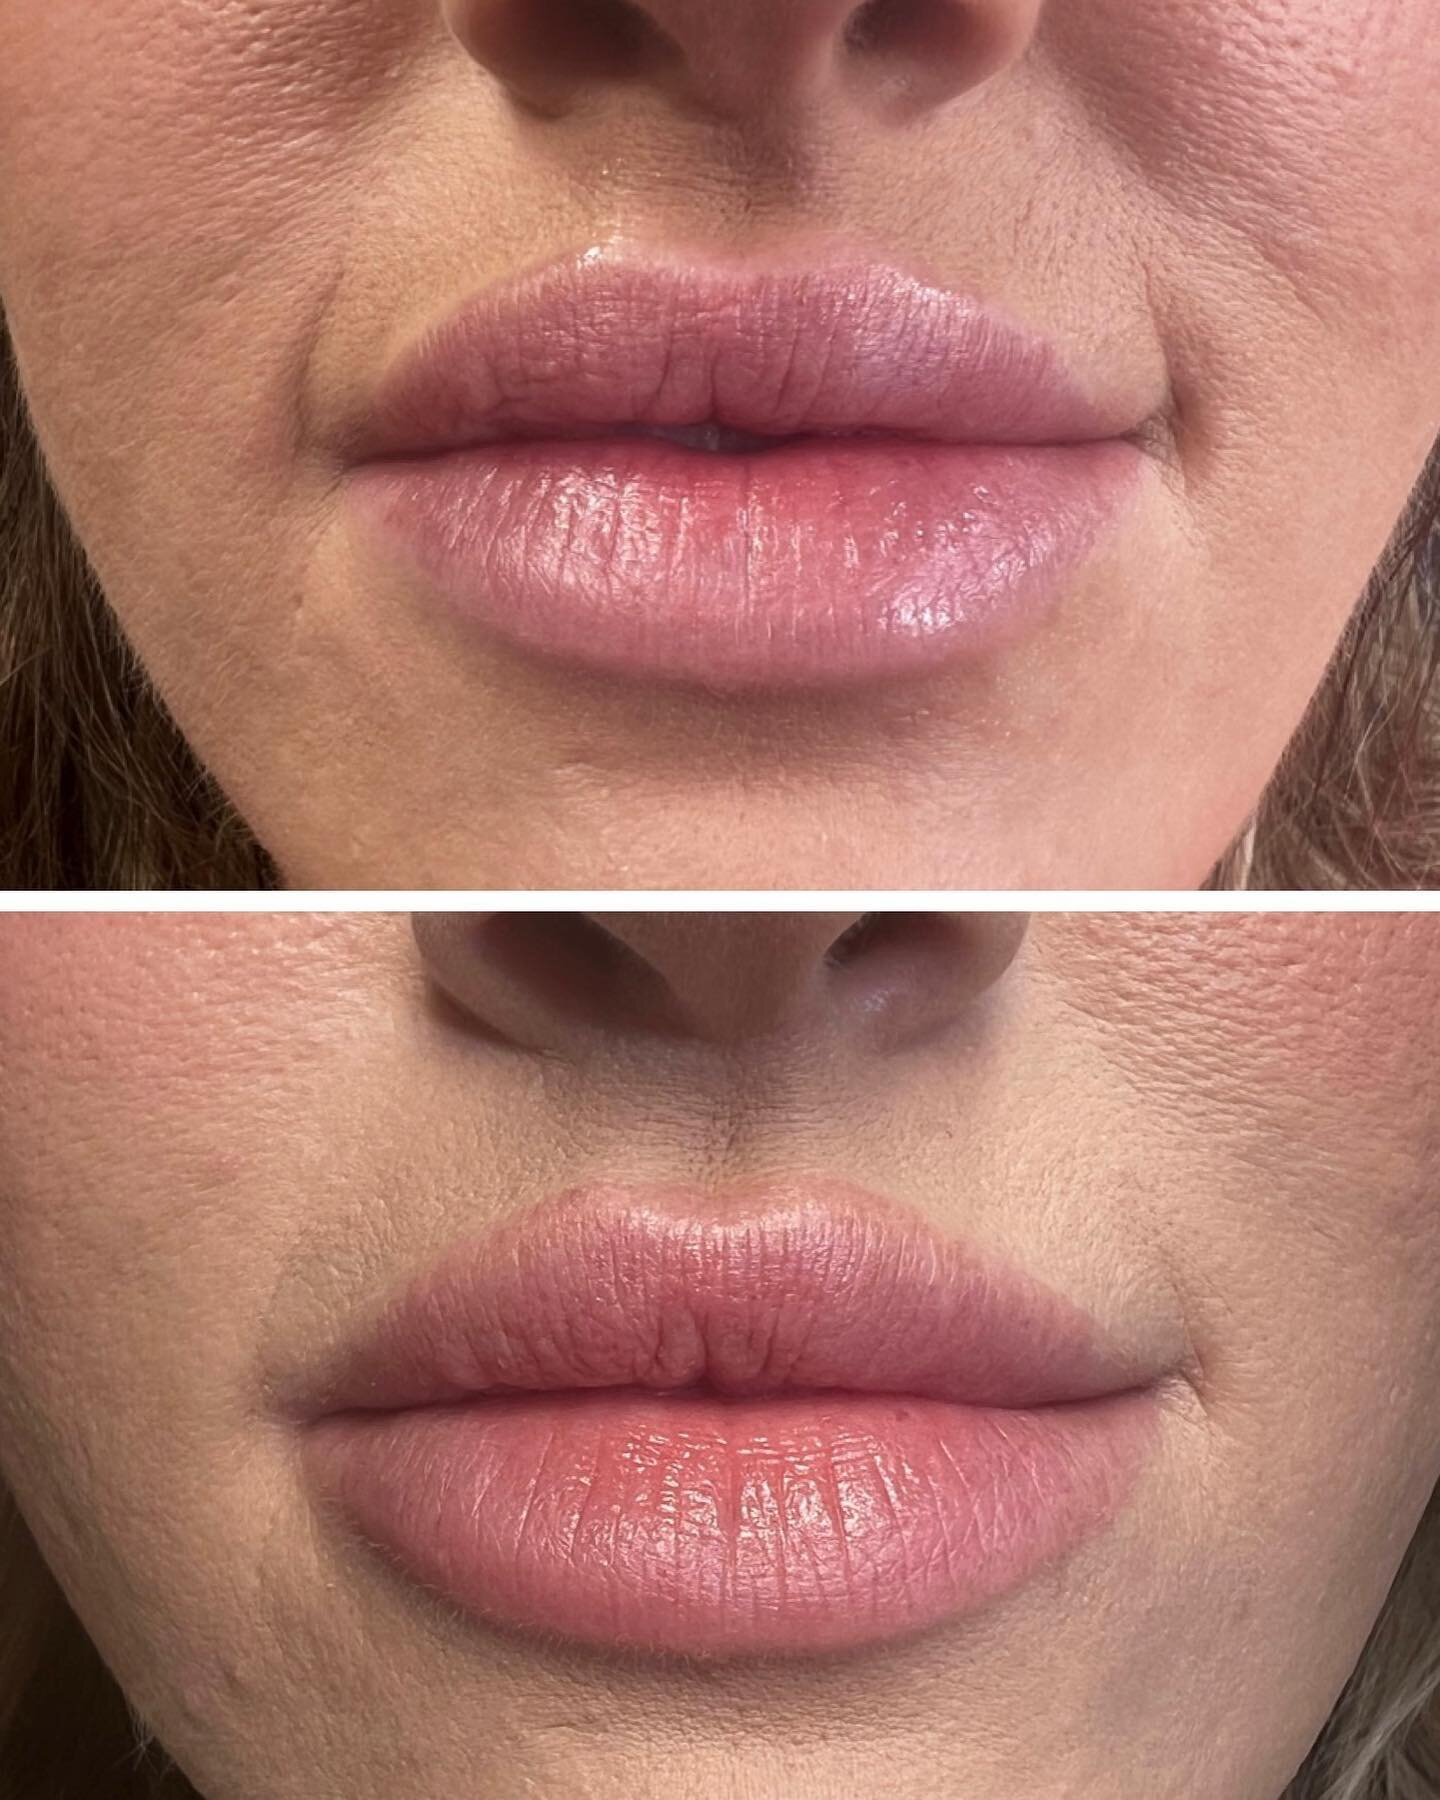 💋I love a good lip revision! Especially an after picture when they are completely healed! 💉 The bottom pic was taken 3 weeks after we refilled them (we dissolved first of course!) ☺️&hearts;️ look how much SOFTER those edges look 😍😍#lips #lip #li